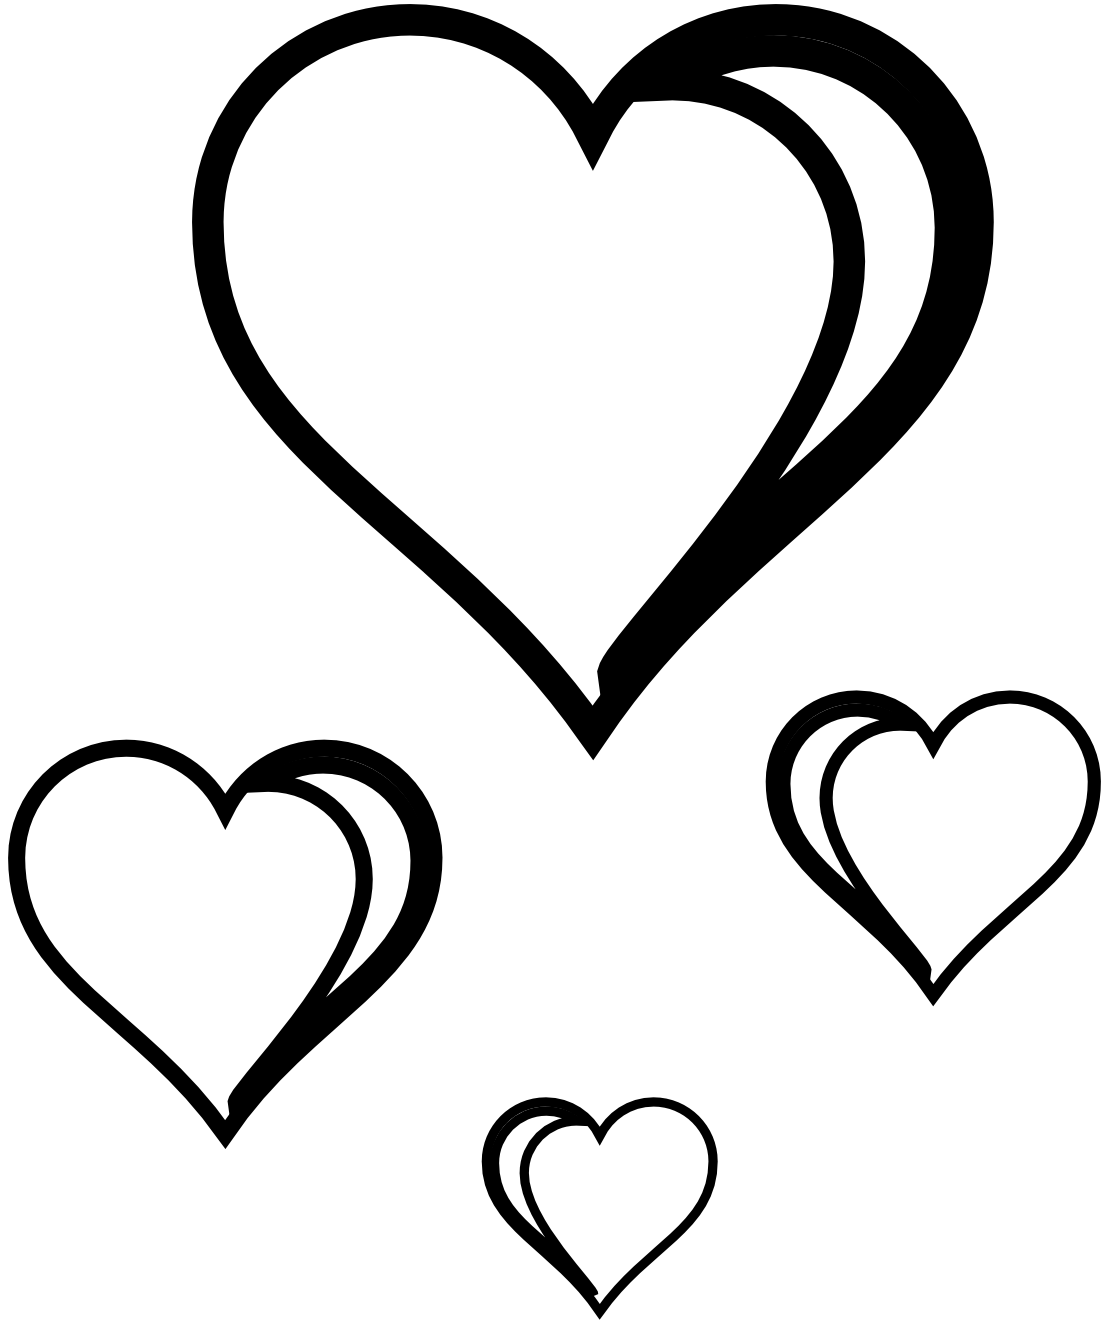 Heart Vector Graphic - Clipart library